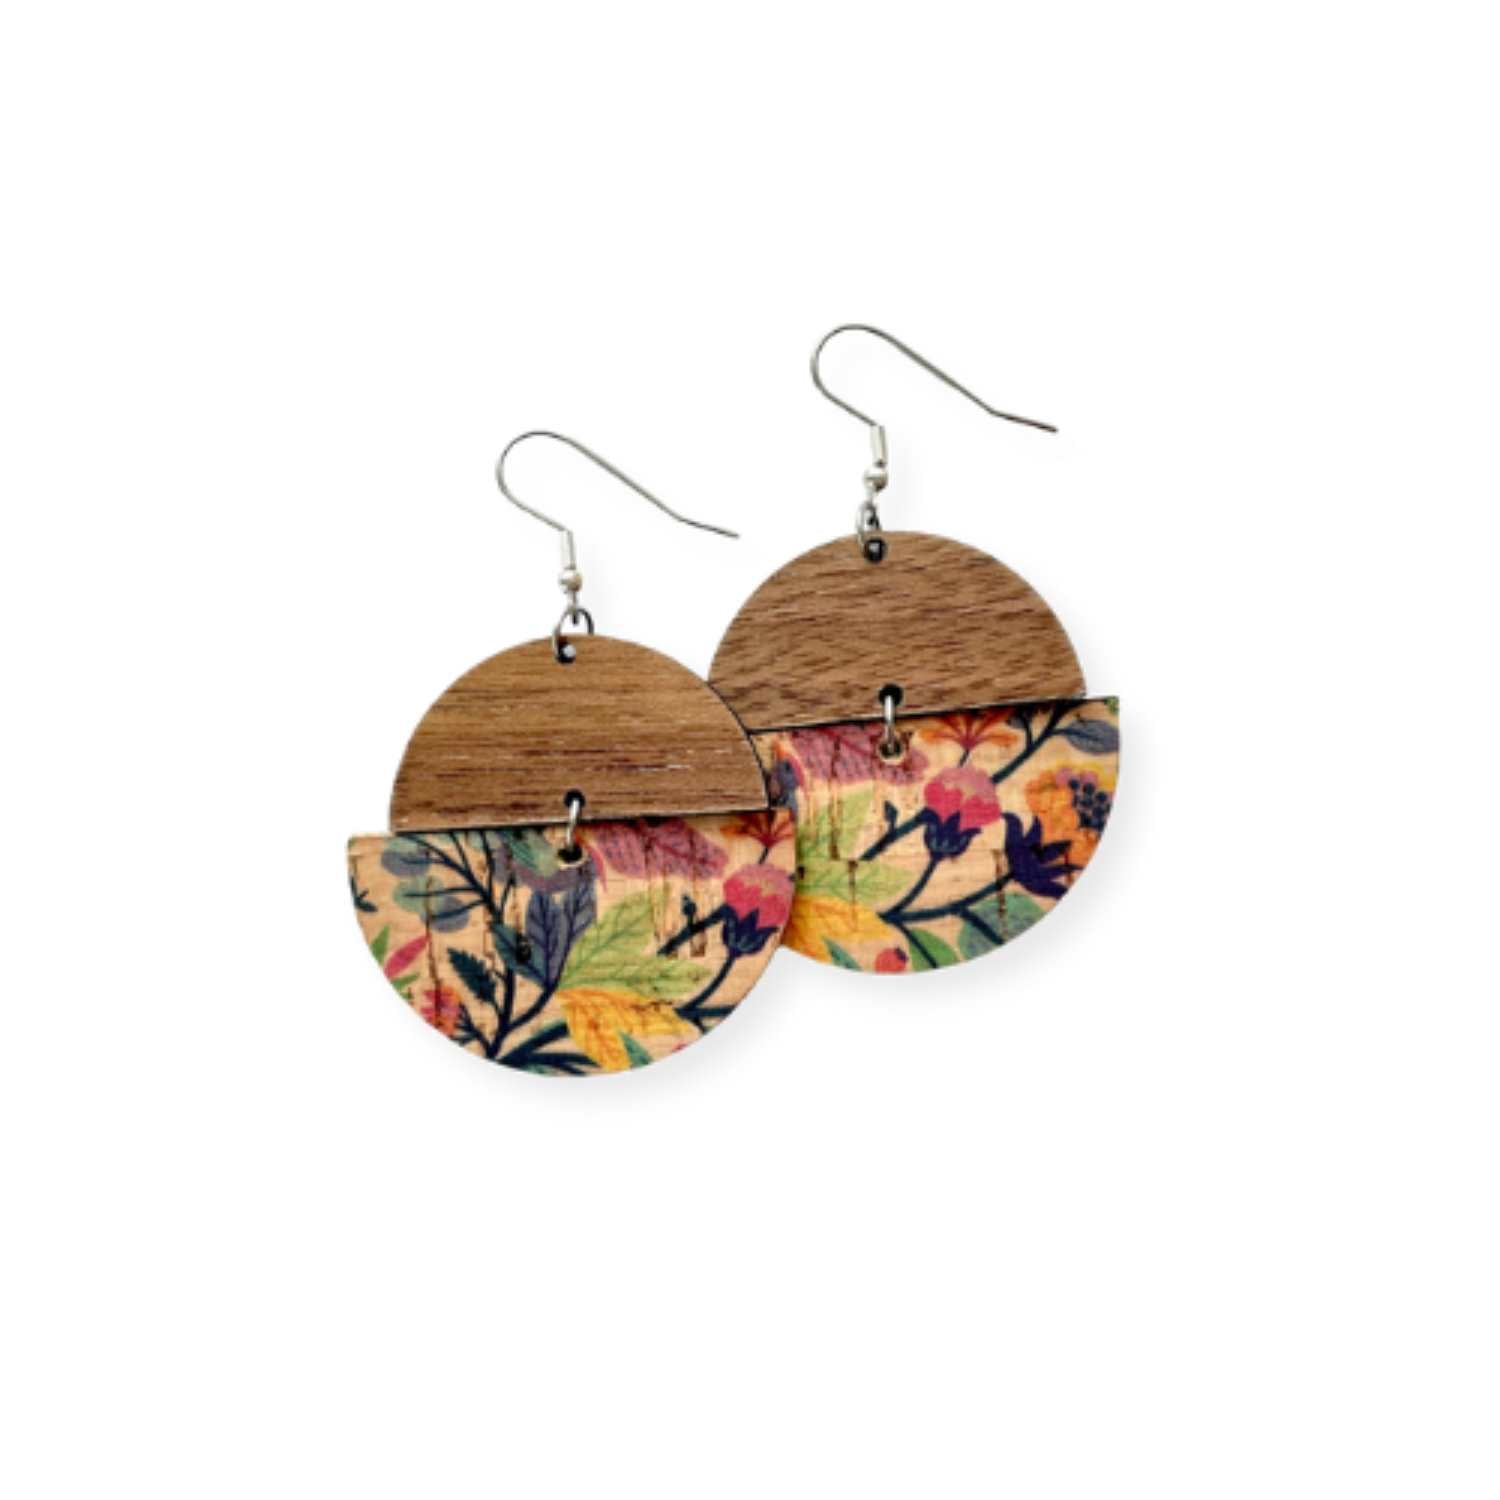 Everly Cork and Wood Handcrafted Round Earrings-Tropical Floral